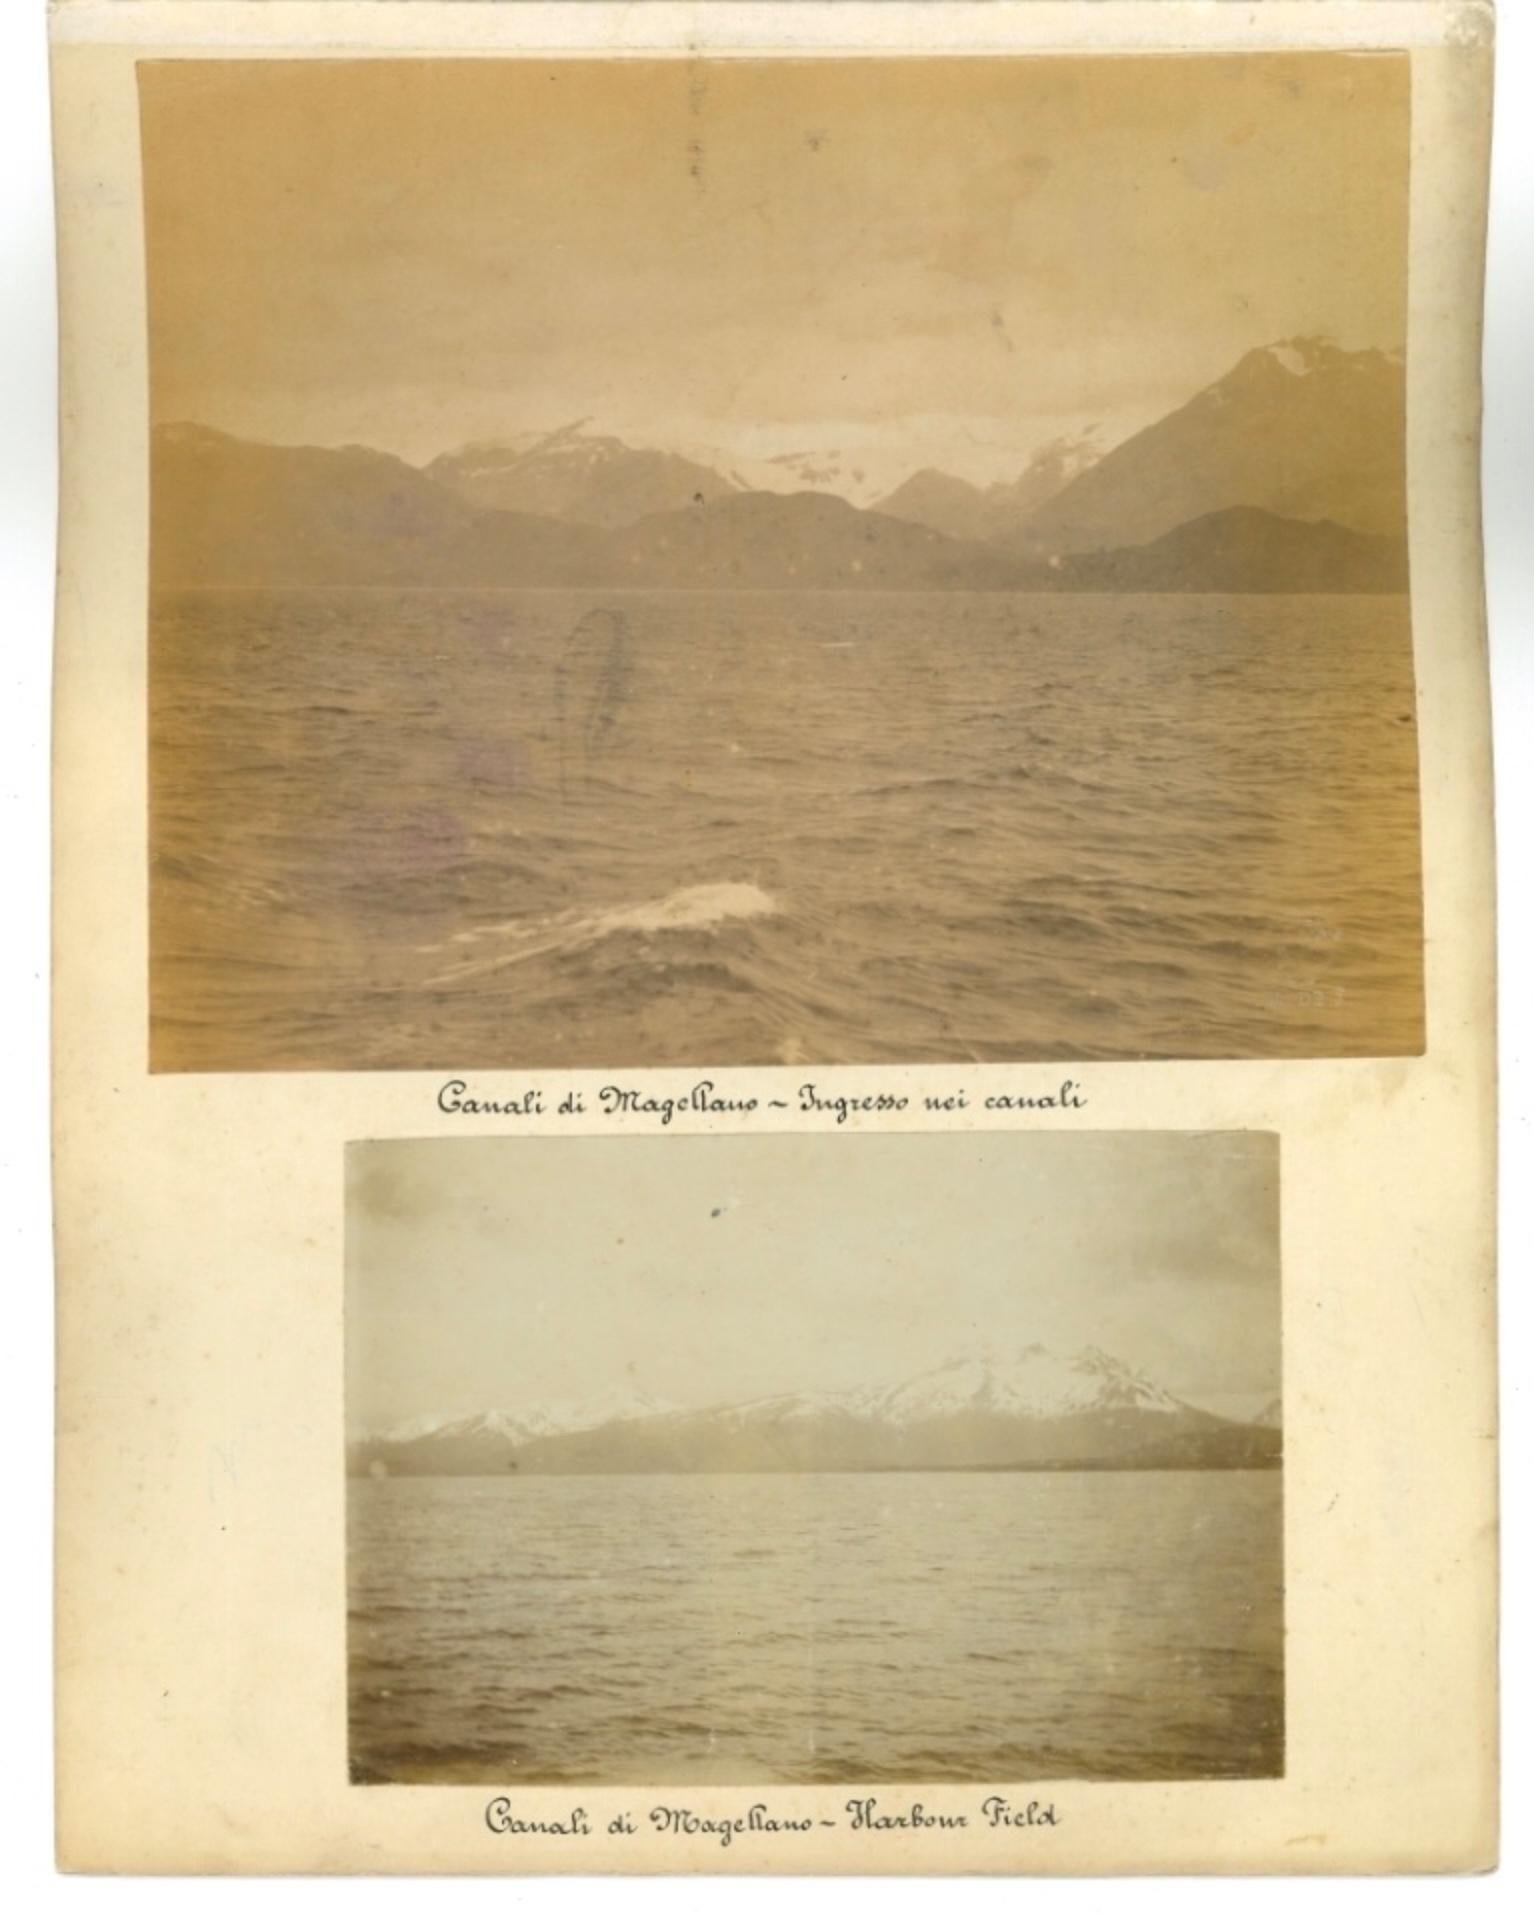 Ancient Views of the Strait of Magellan - Original Vintage Photo - 1880s - Photograph by Unknown